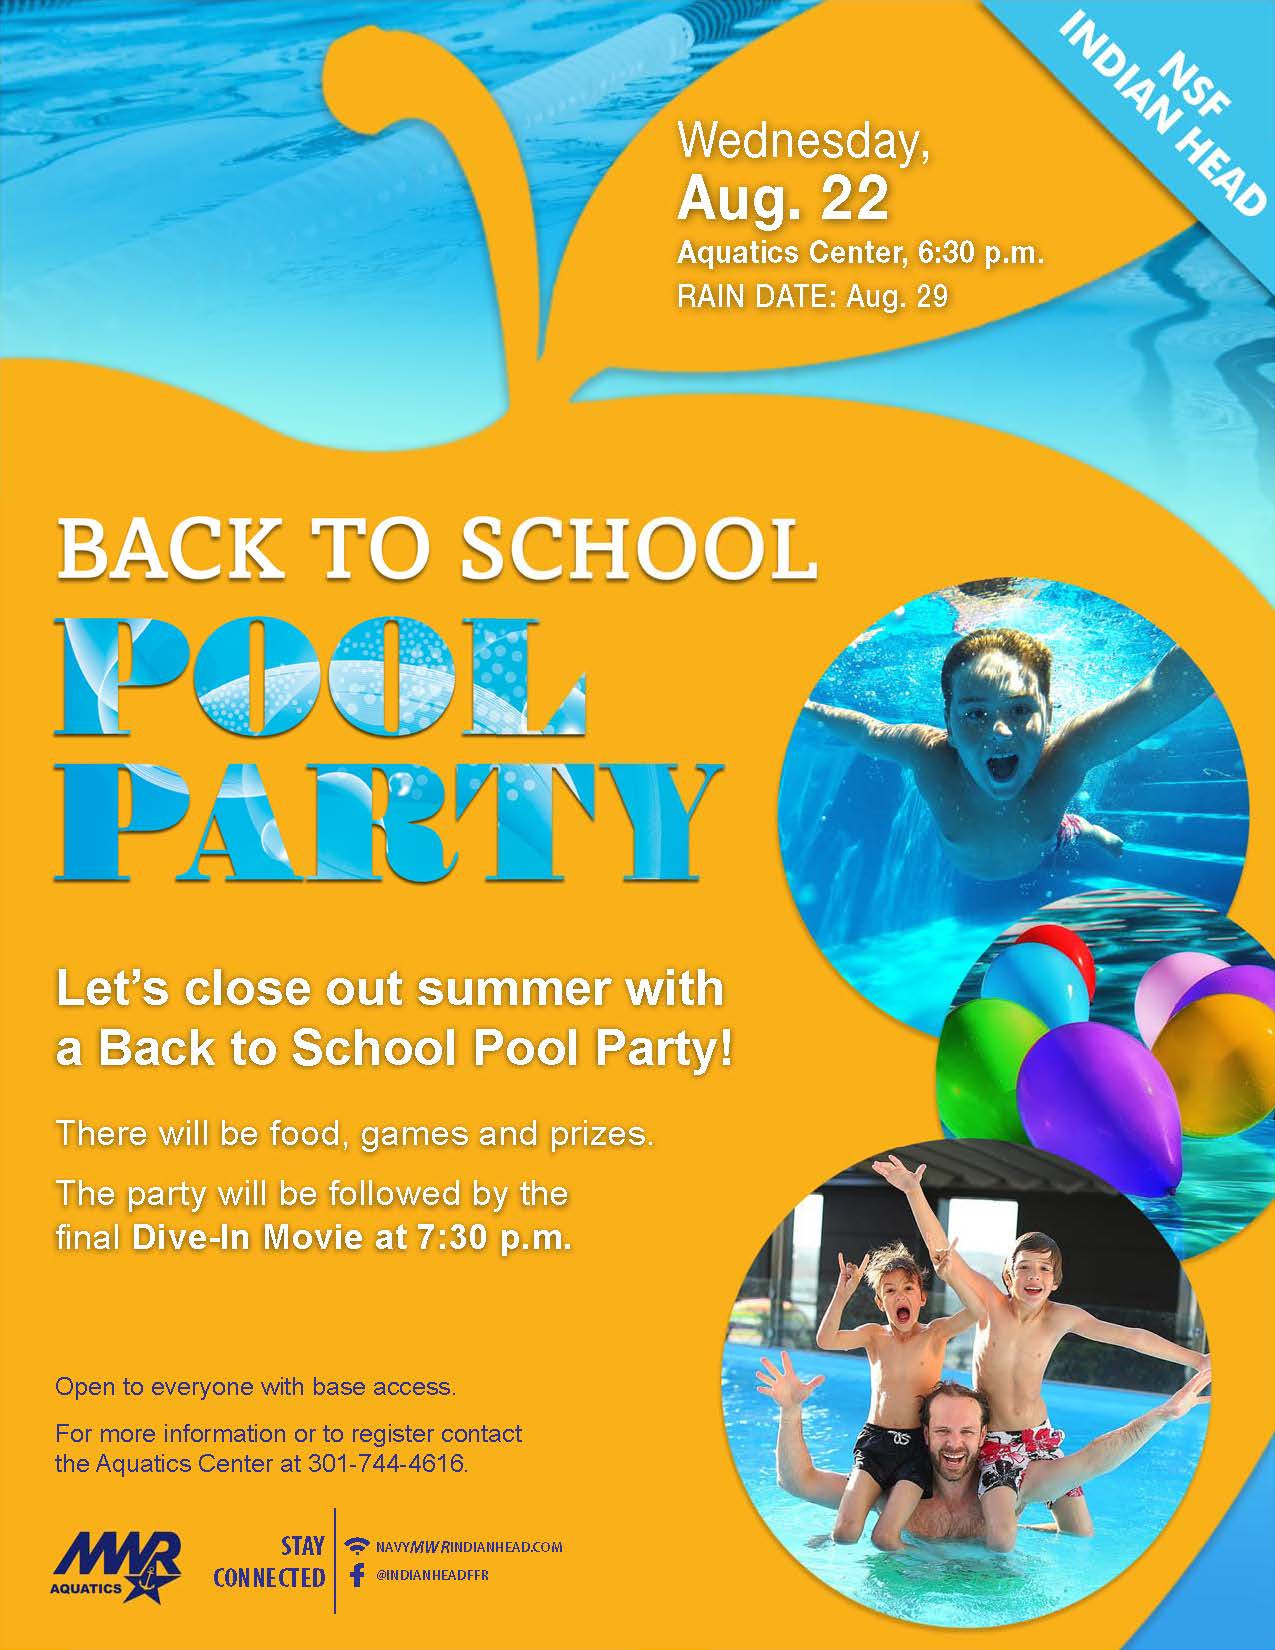 Back To School Pool Party Ideas
 BACK TO SCHOOL POOL PARTY